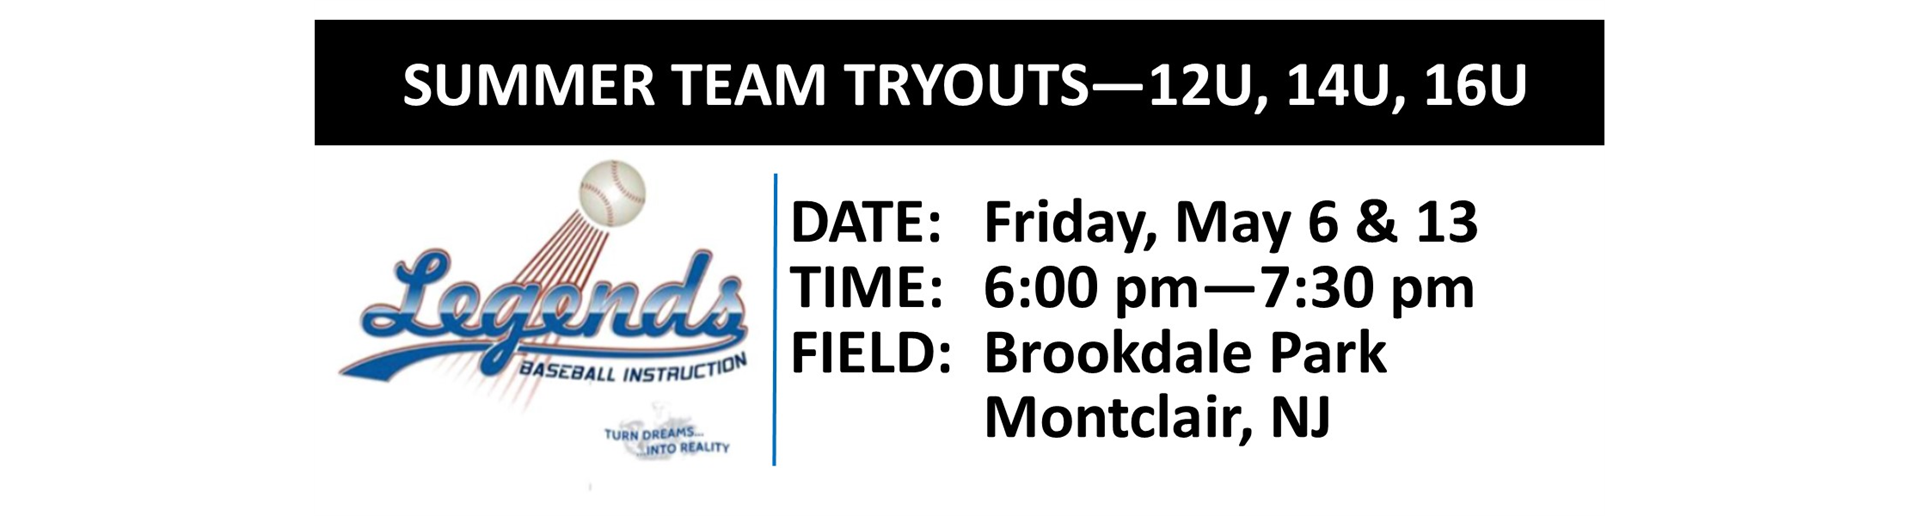 SUMMER TEAM TRYOUTS